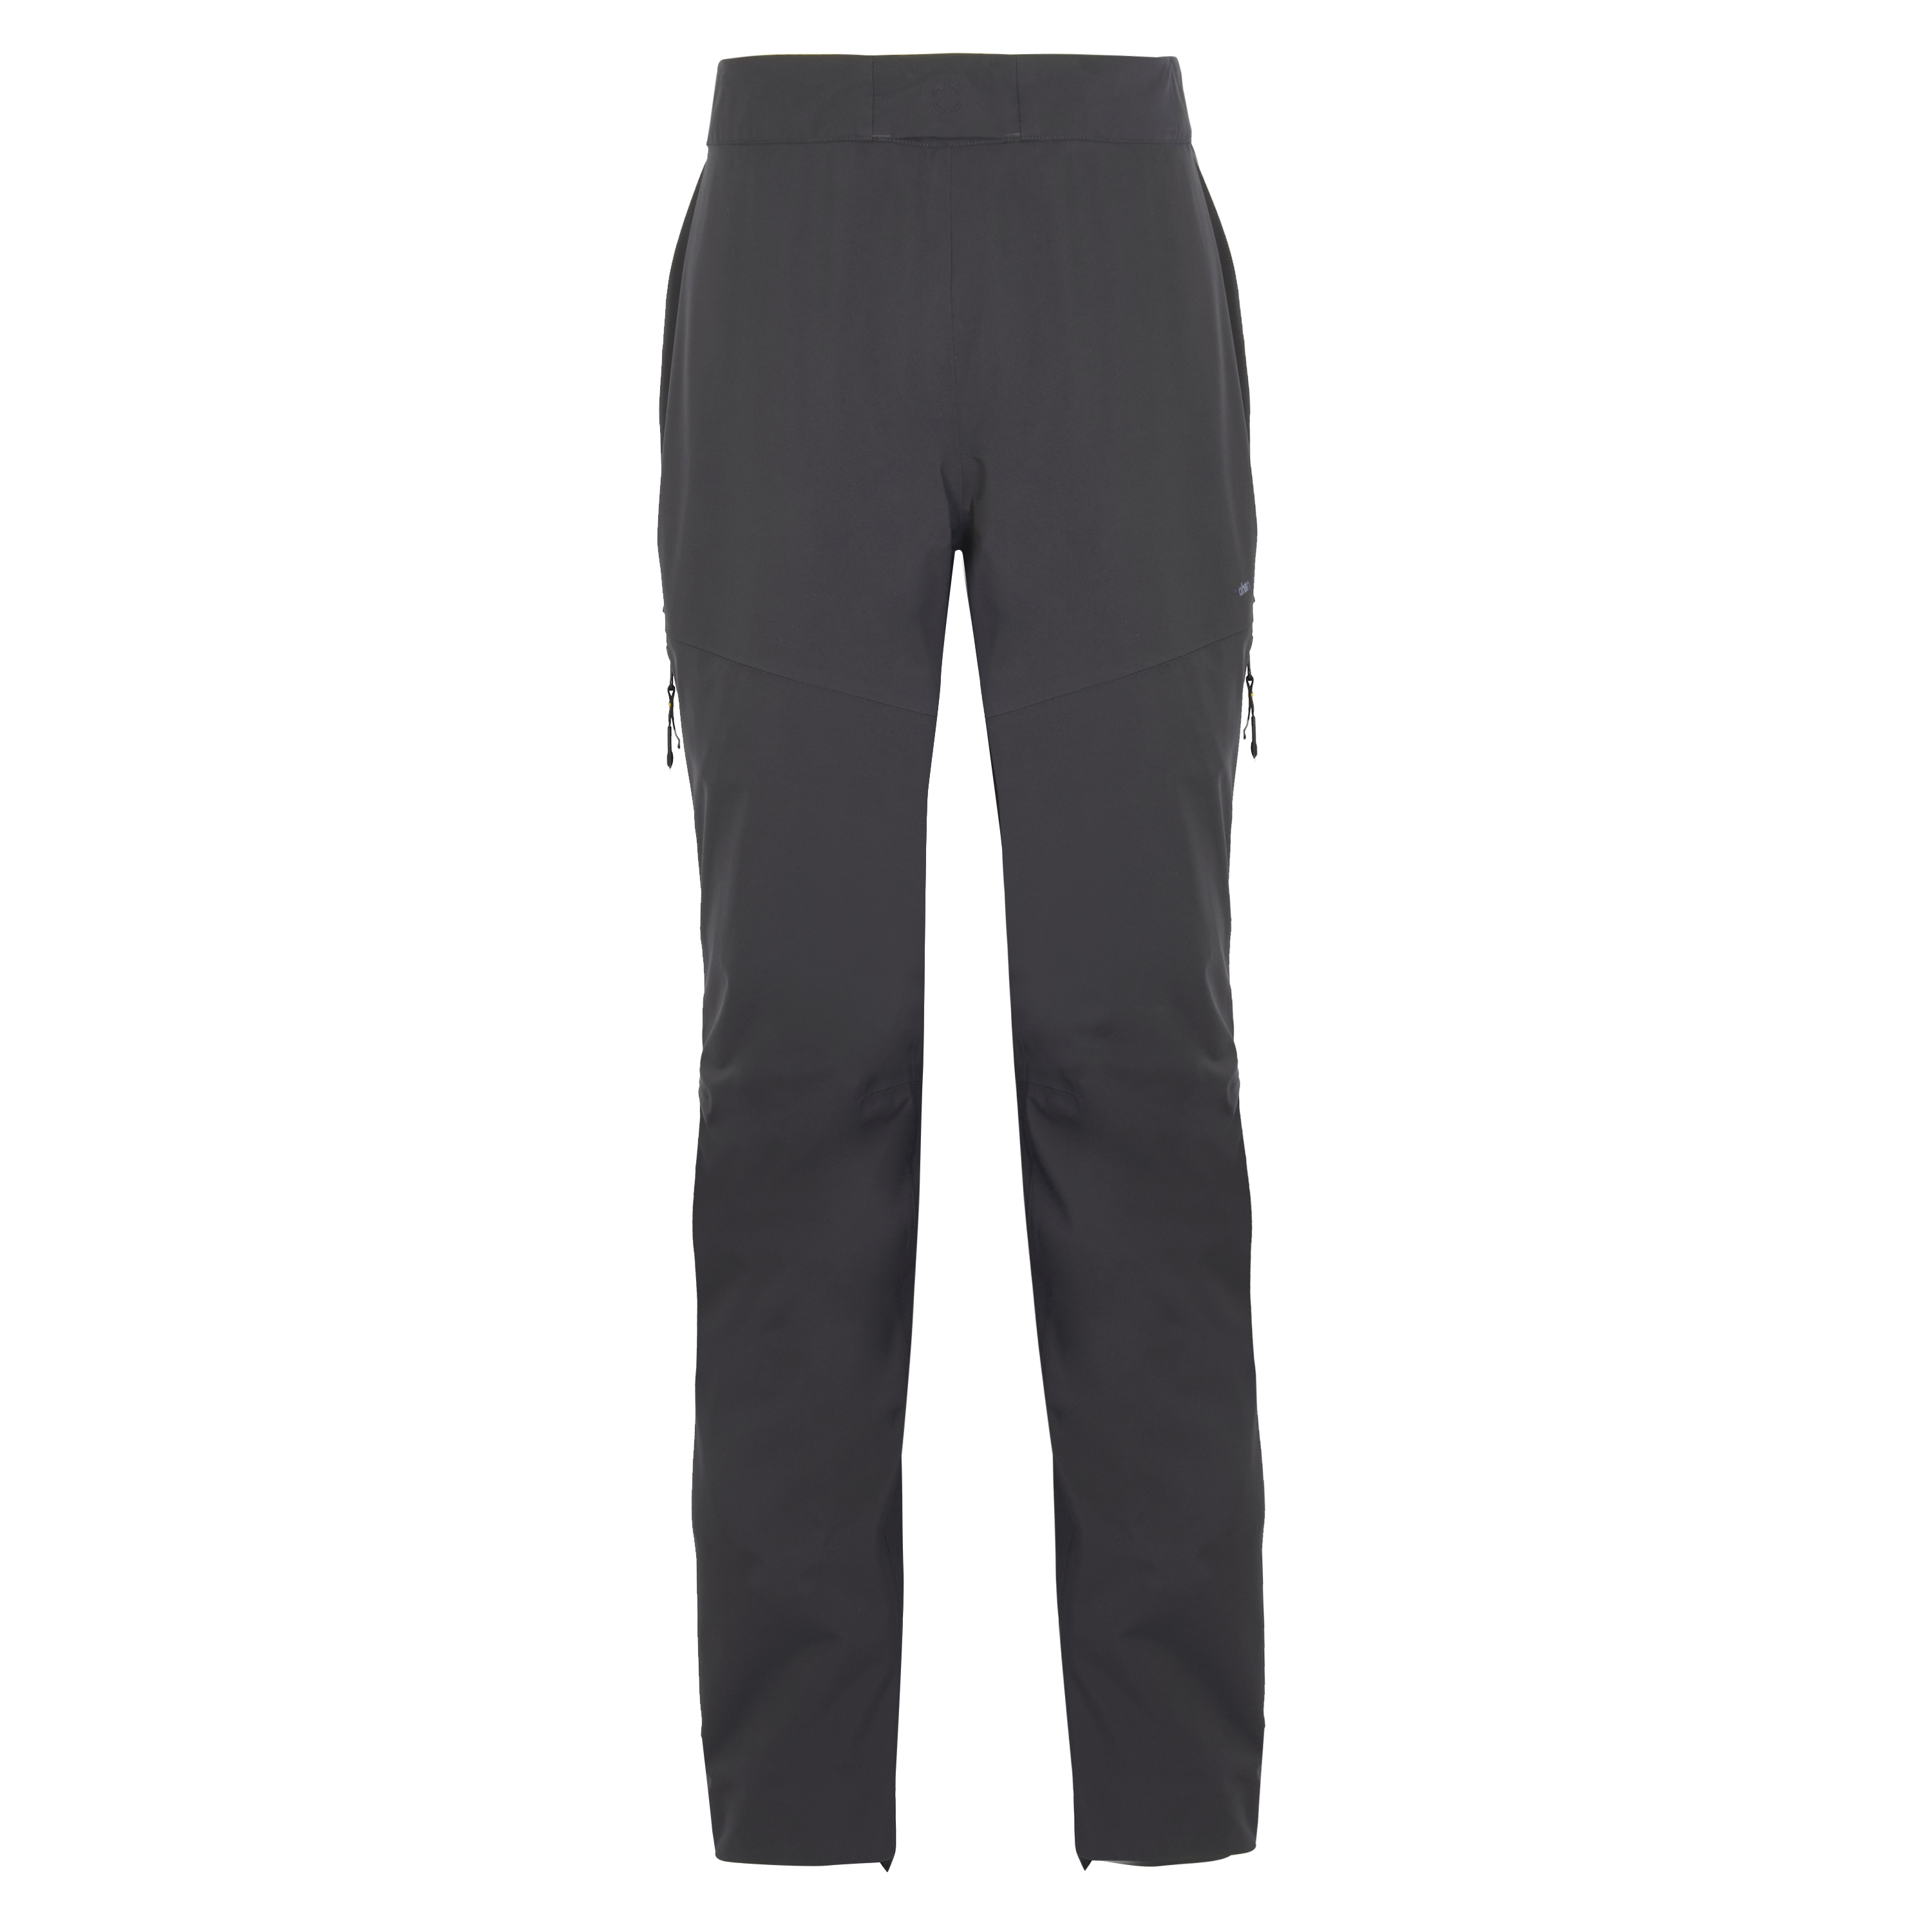 Rohan Womens Ventus Overtrousers